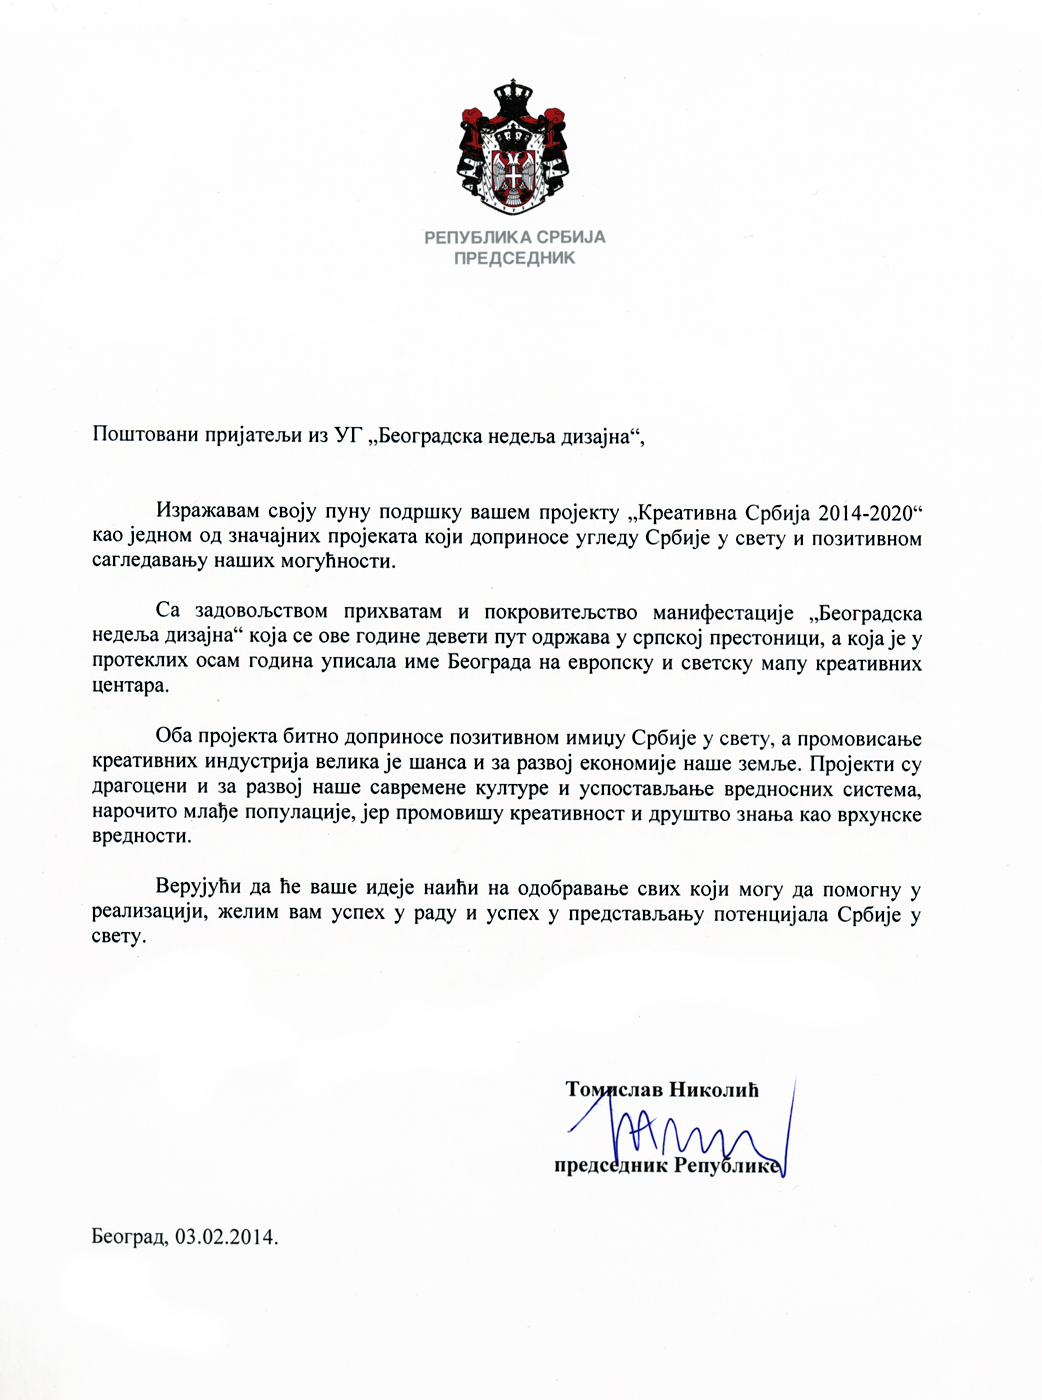 VOICE OF SUPPORT FROM THE PRESIDENT OF REPUBLIC OF SERBIA